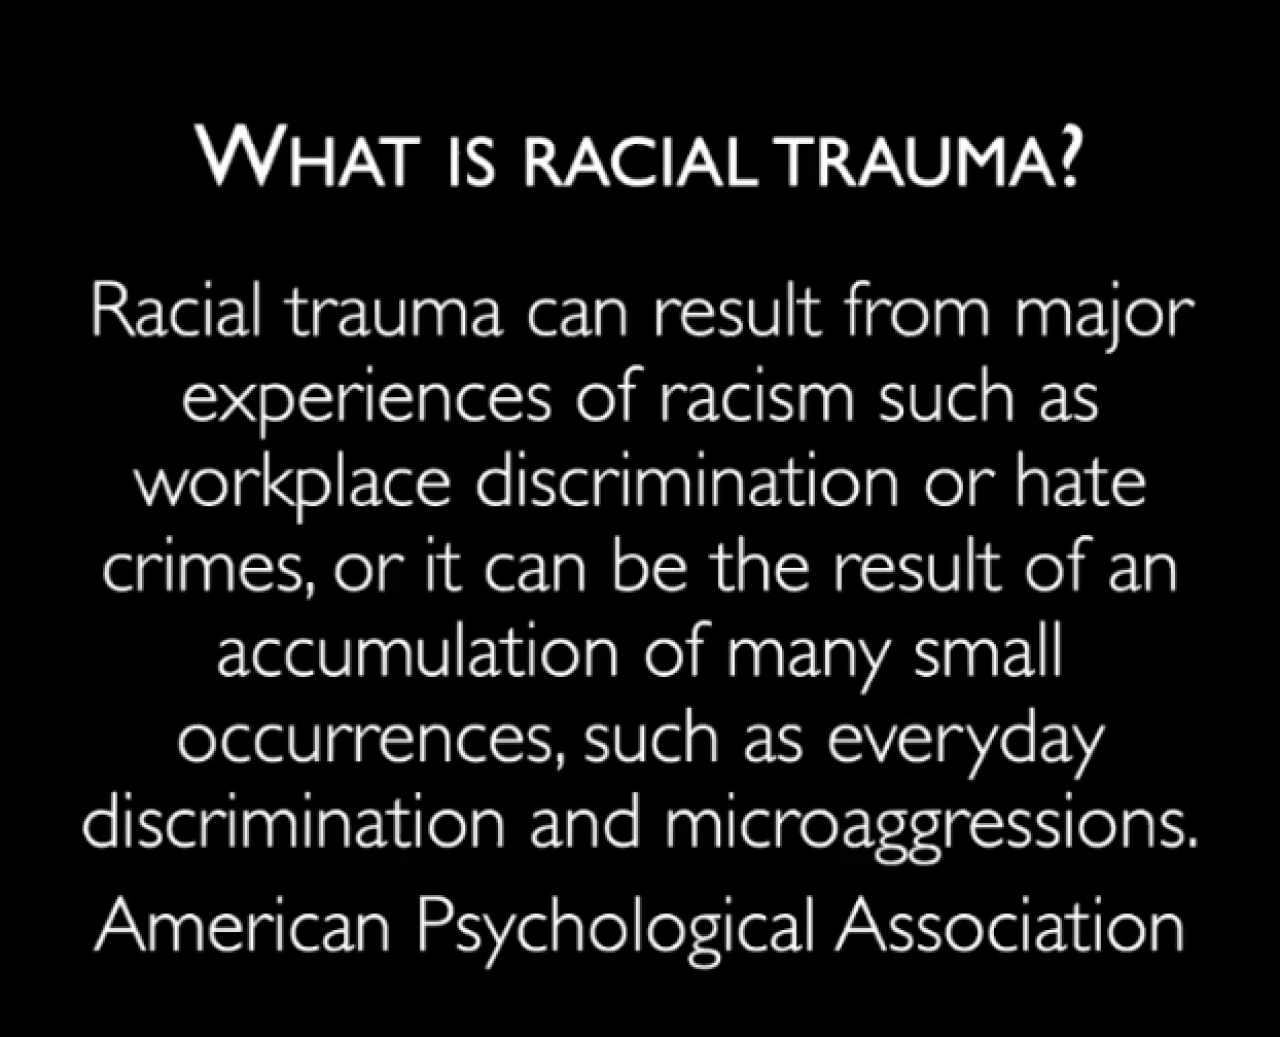 A slide defining racial trauma, the result of "major experiences of racism such as workplace discrimination or hate crimes," or "an accumulation of many small occurrences," like microaggressions.